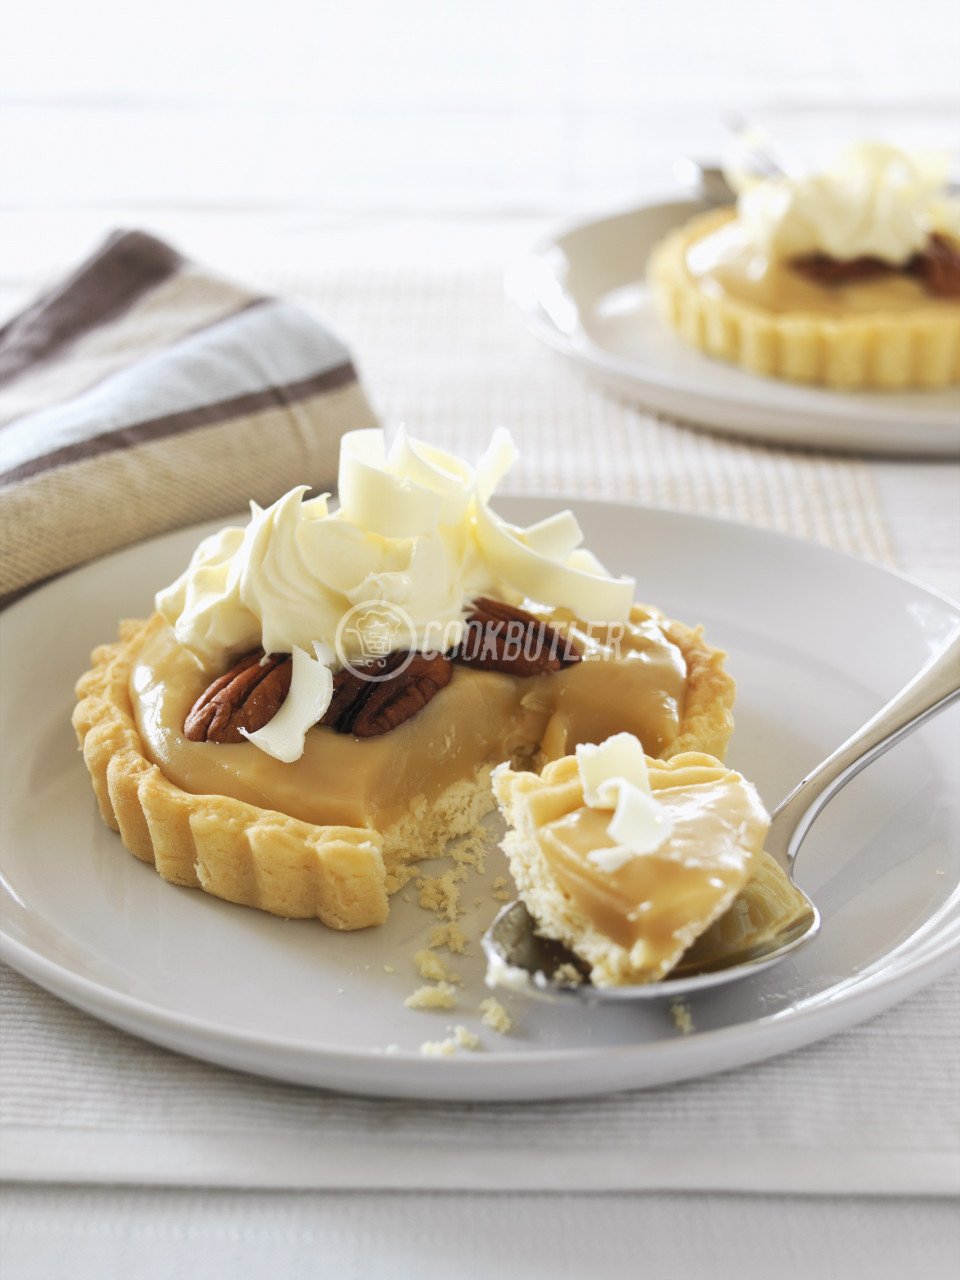 Banoffee pie (Banana and toffee pie, England) | preview